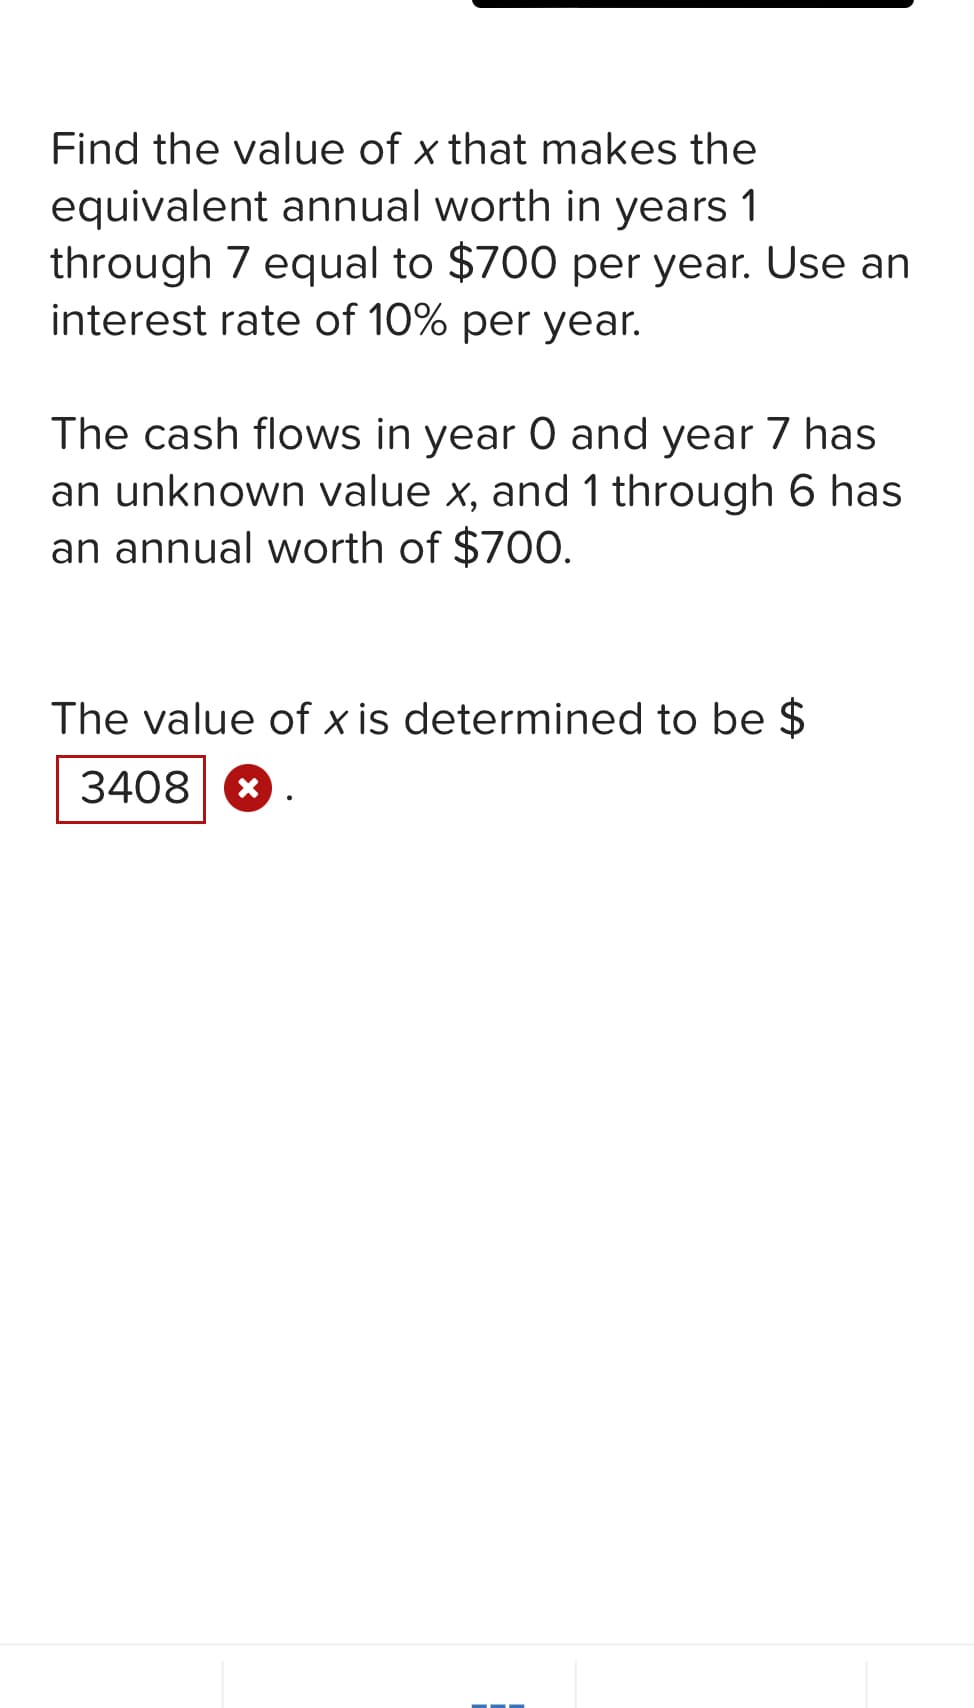 Find the value of x that makes the
equivalent annual worth in years 1
through 7 equal to $700 per year. Use an
interest rate of 10% per year.
The cash flows in year 0 and year 7 has
an unknown value x, and 1 through 6 has
an annual worth of $700.
The value of x is determined to be $
3408 x